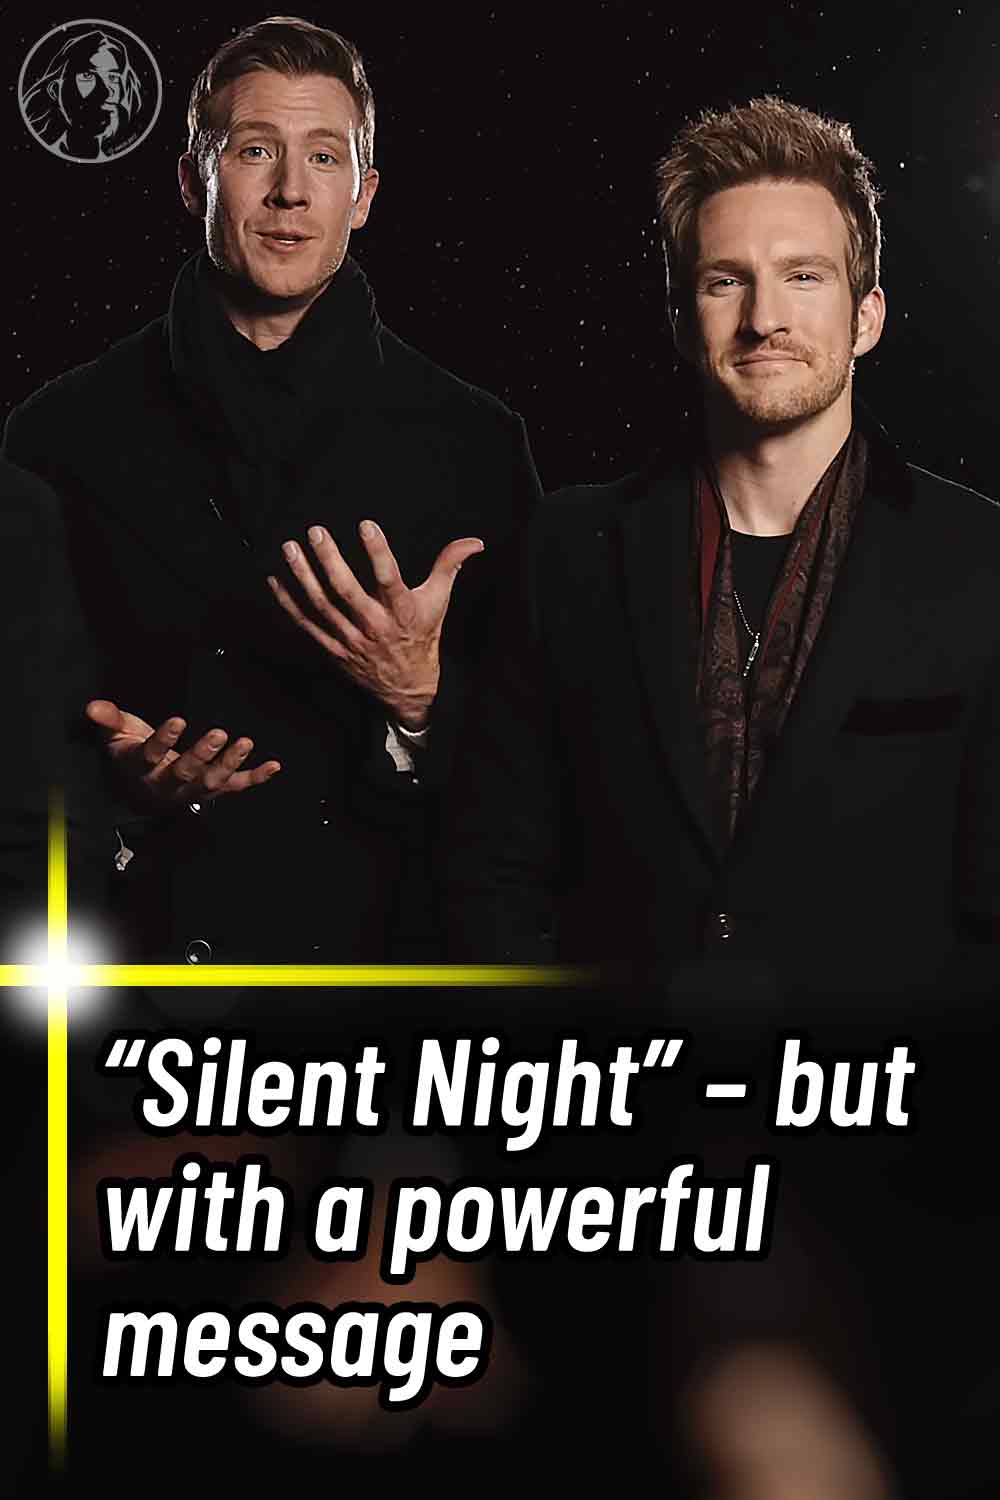 “Silent Night” – but with a powerful message